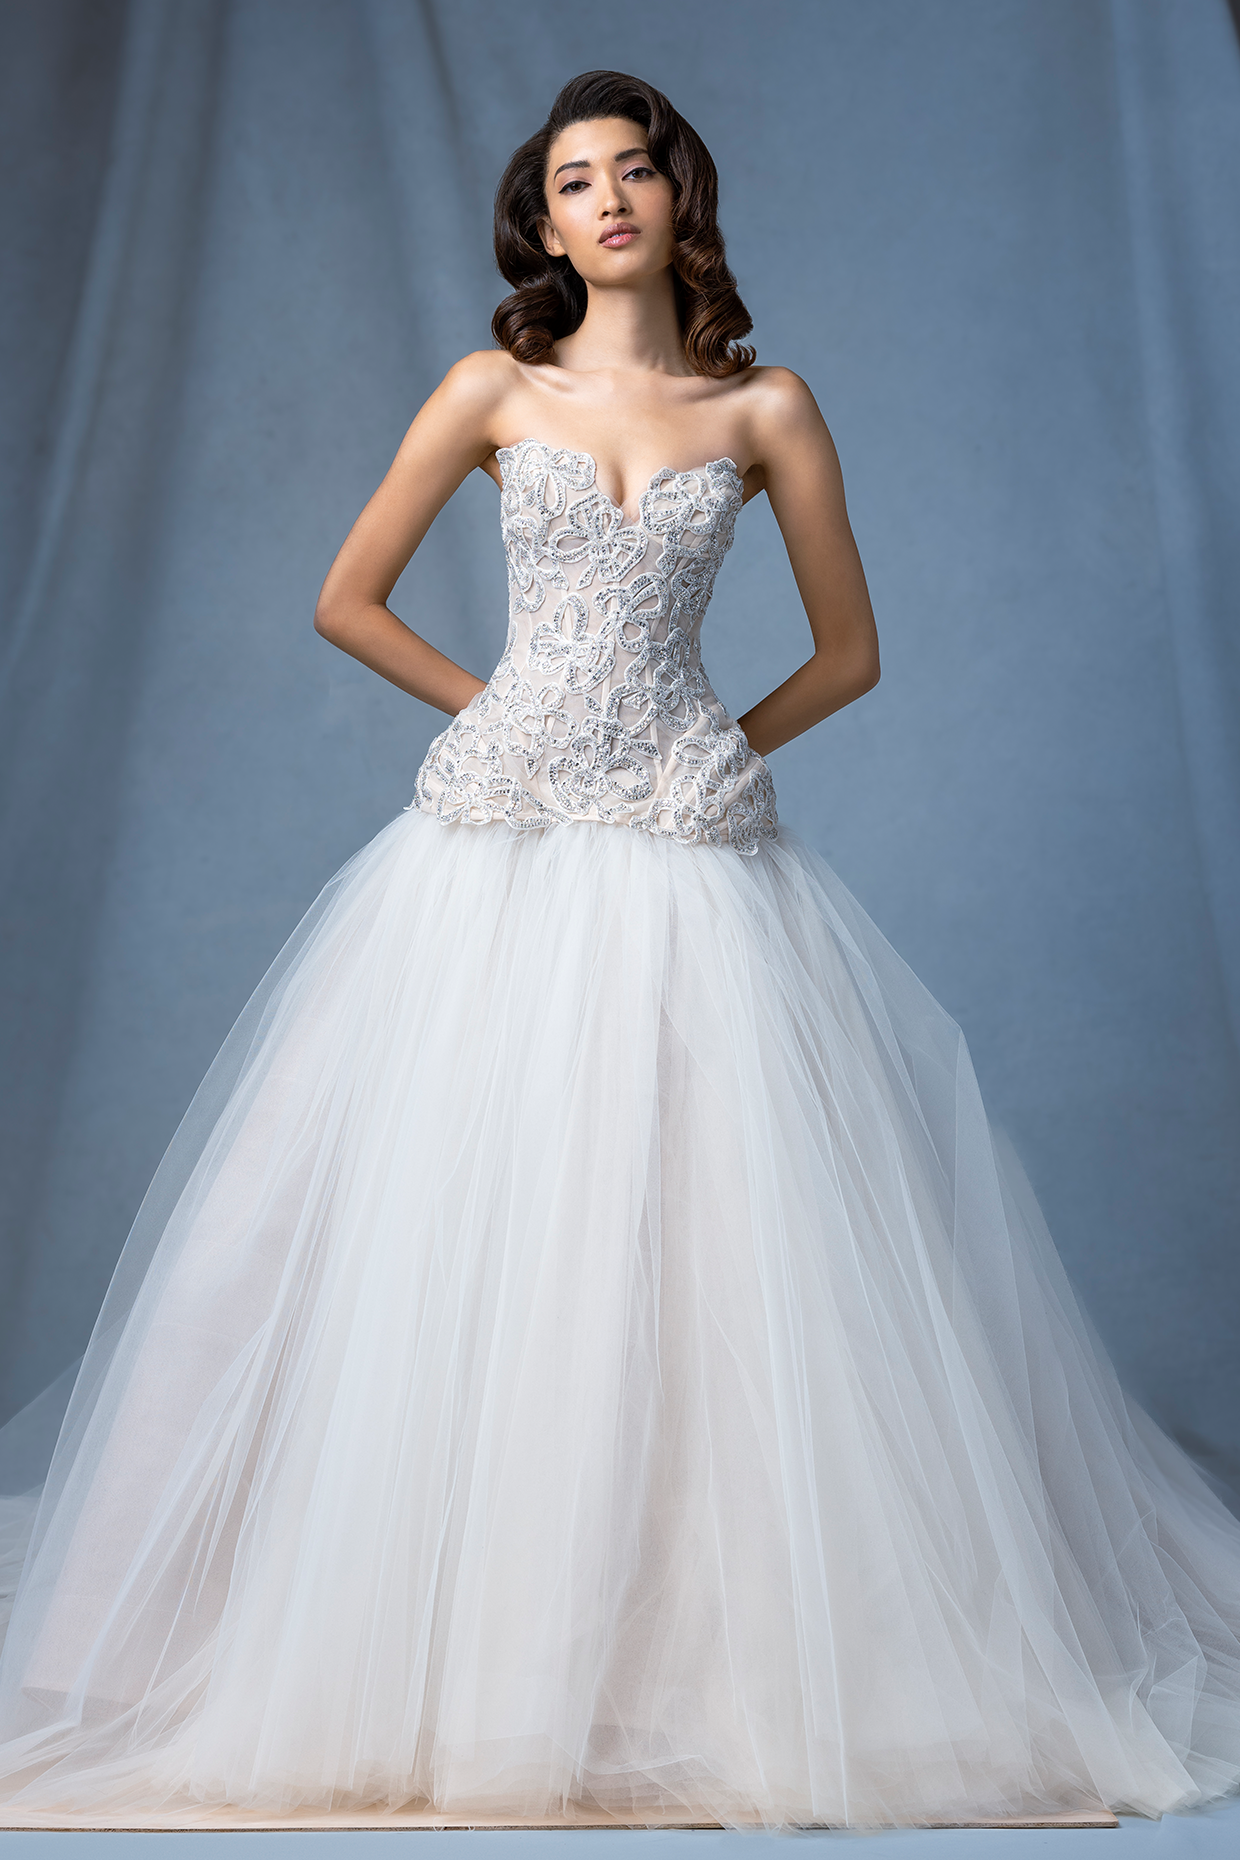 Spellbound Ines Di Santo Wedding Dress Available for Off The Rack